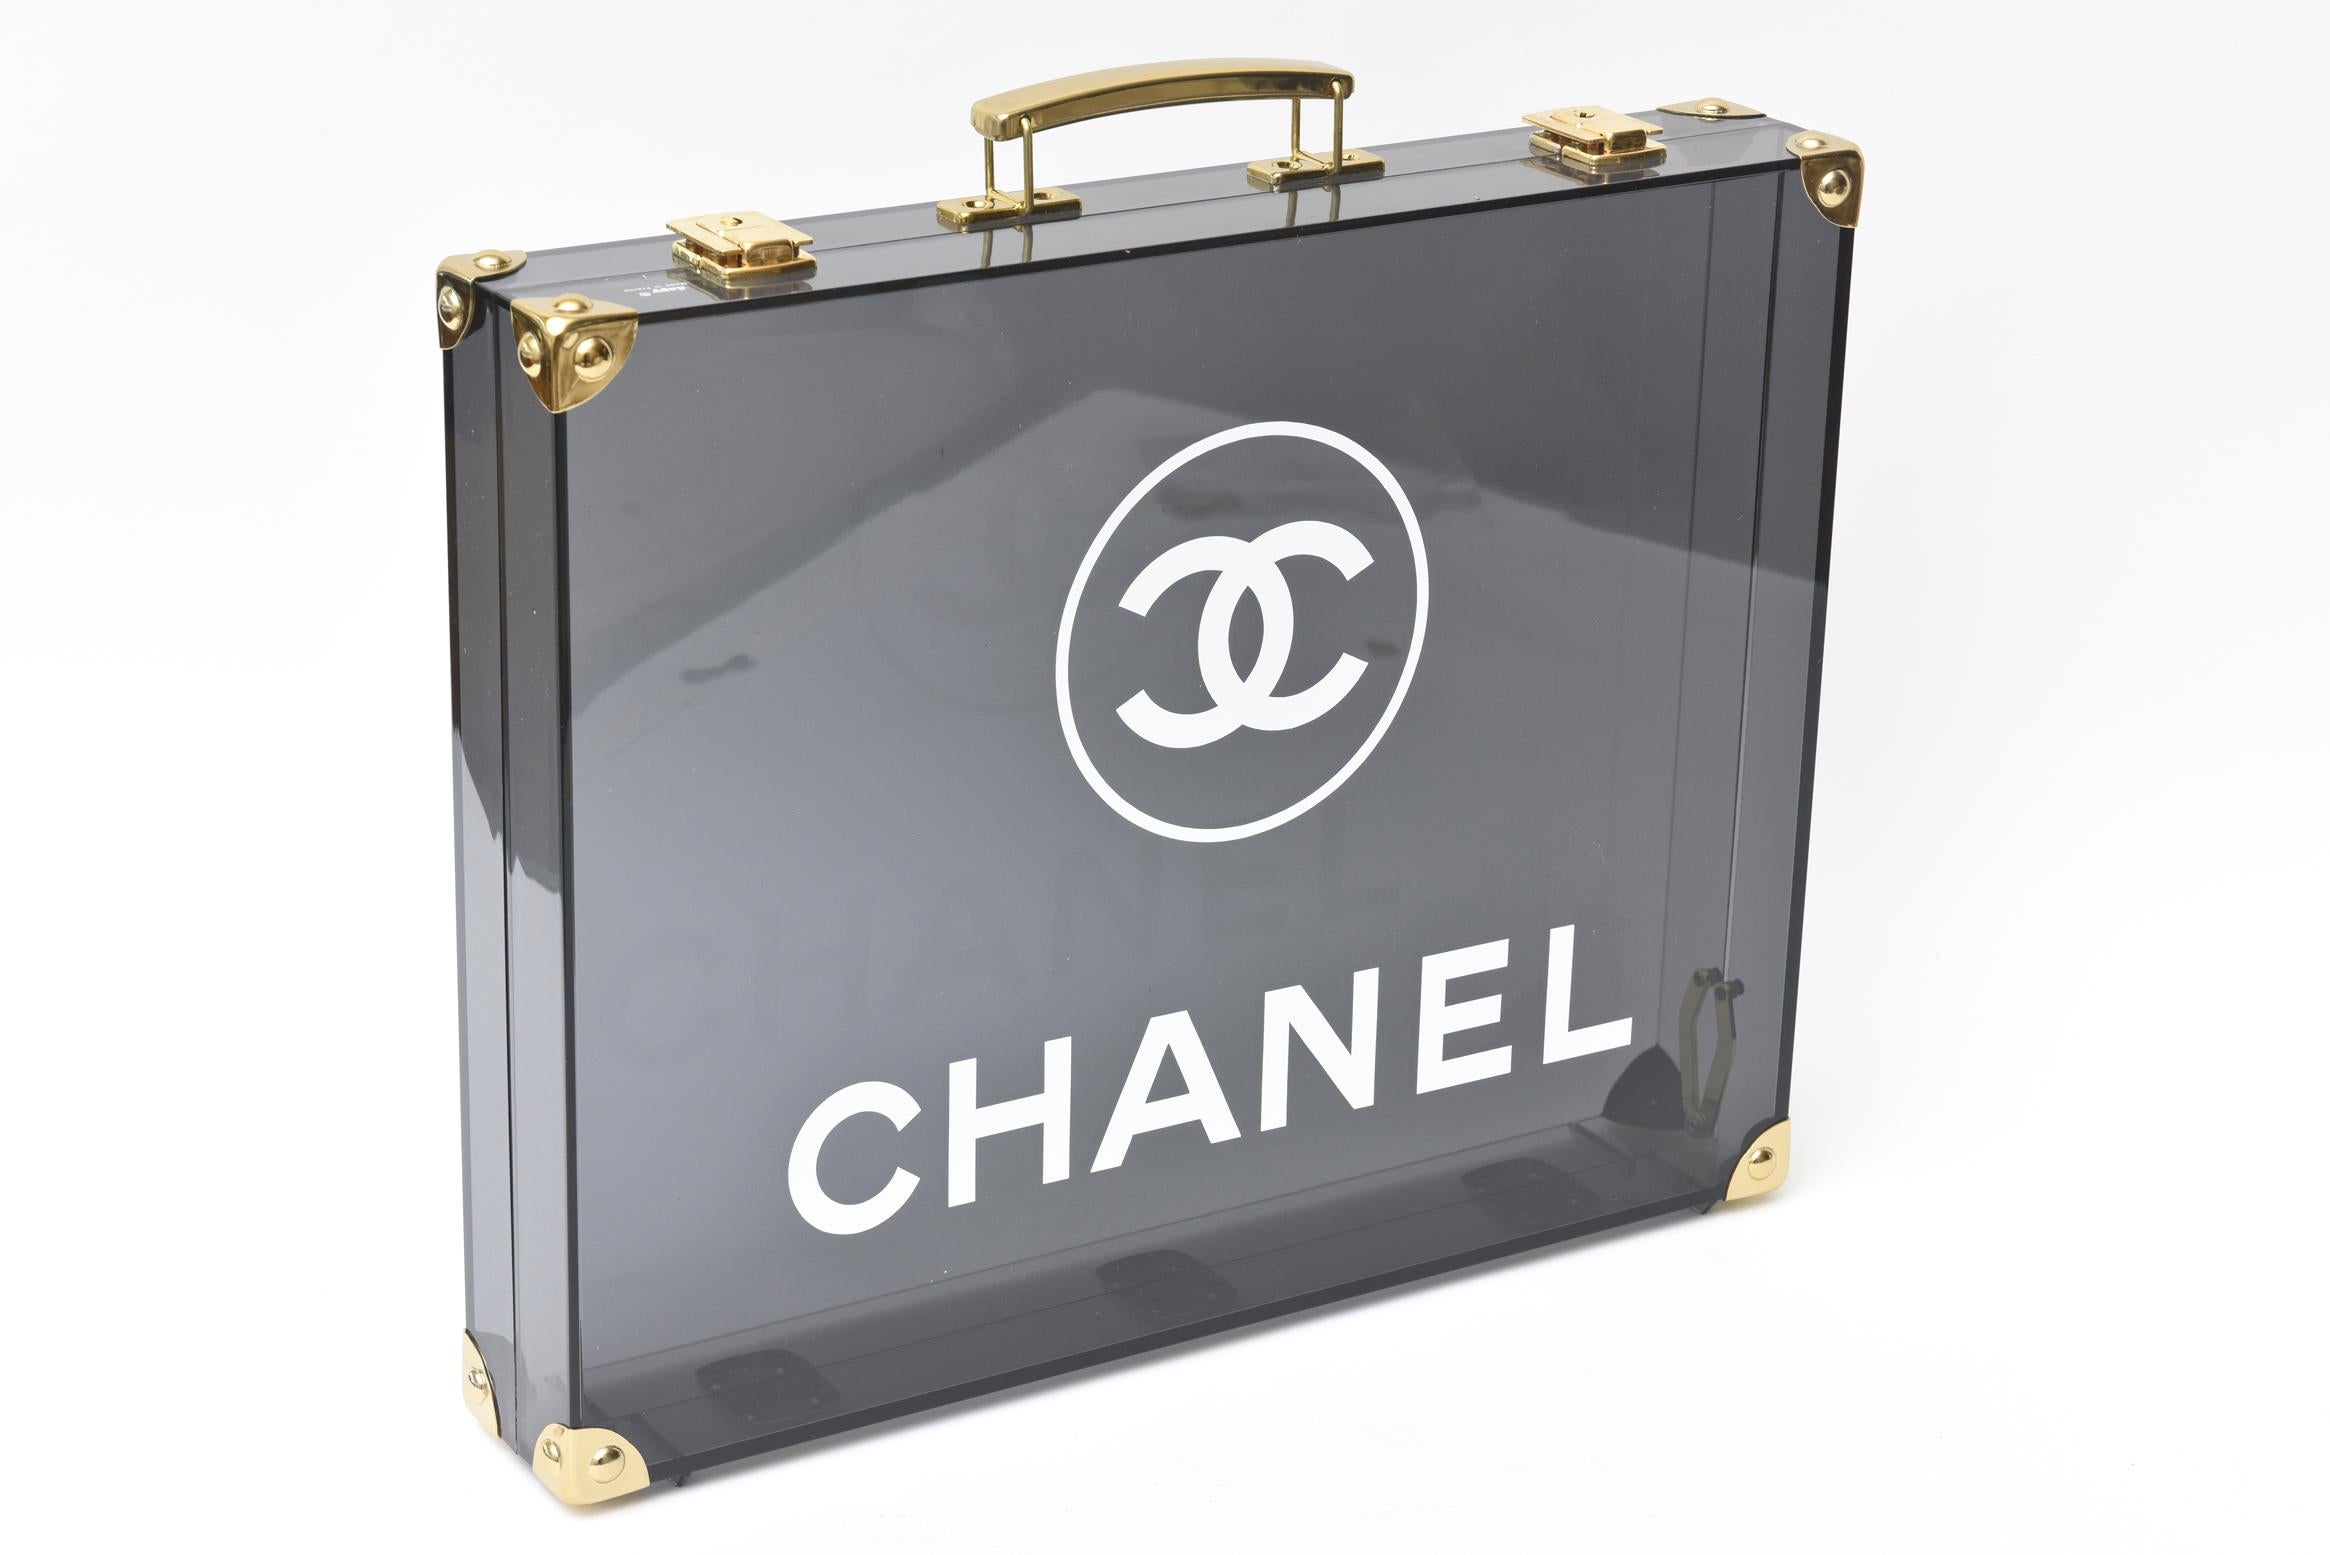 This ever so chic french vintage Chanel lucite briefcase that was never used has its original box. It was produced by Dapy as shown on the original box. The slight black to smoky dark gray lucite body has white lettering of Chanel and original brass